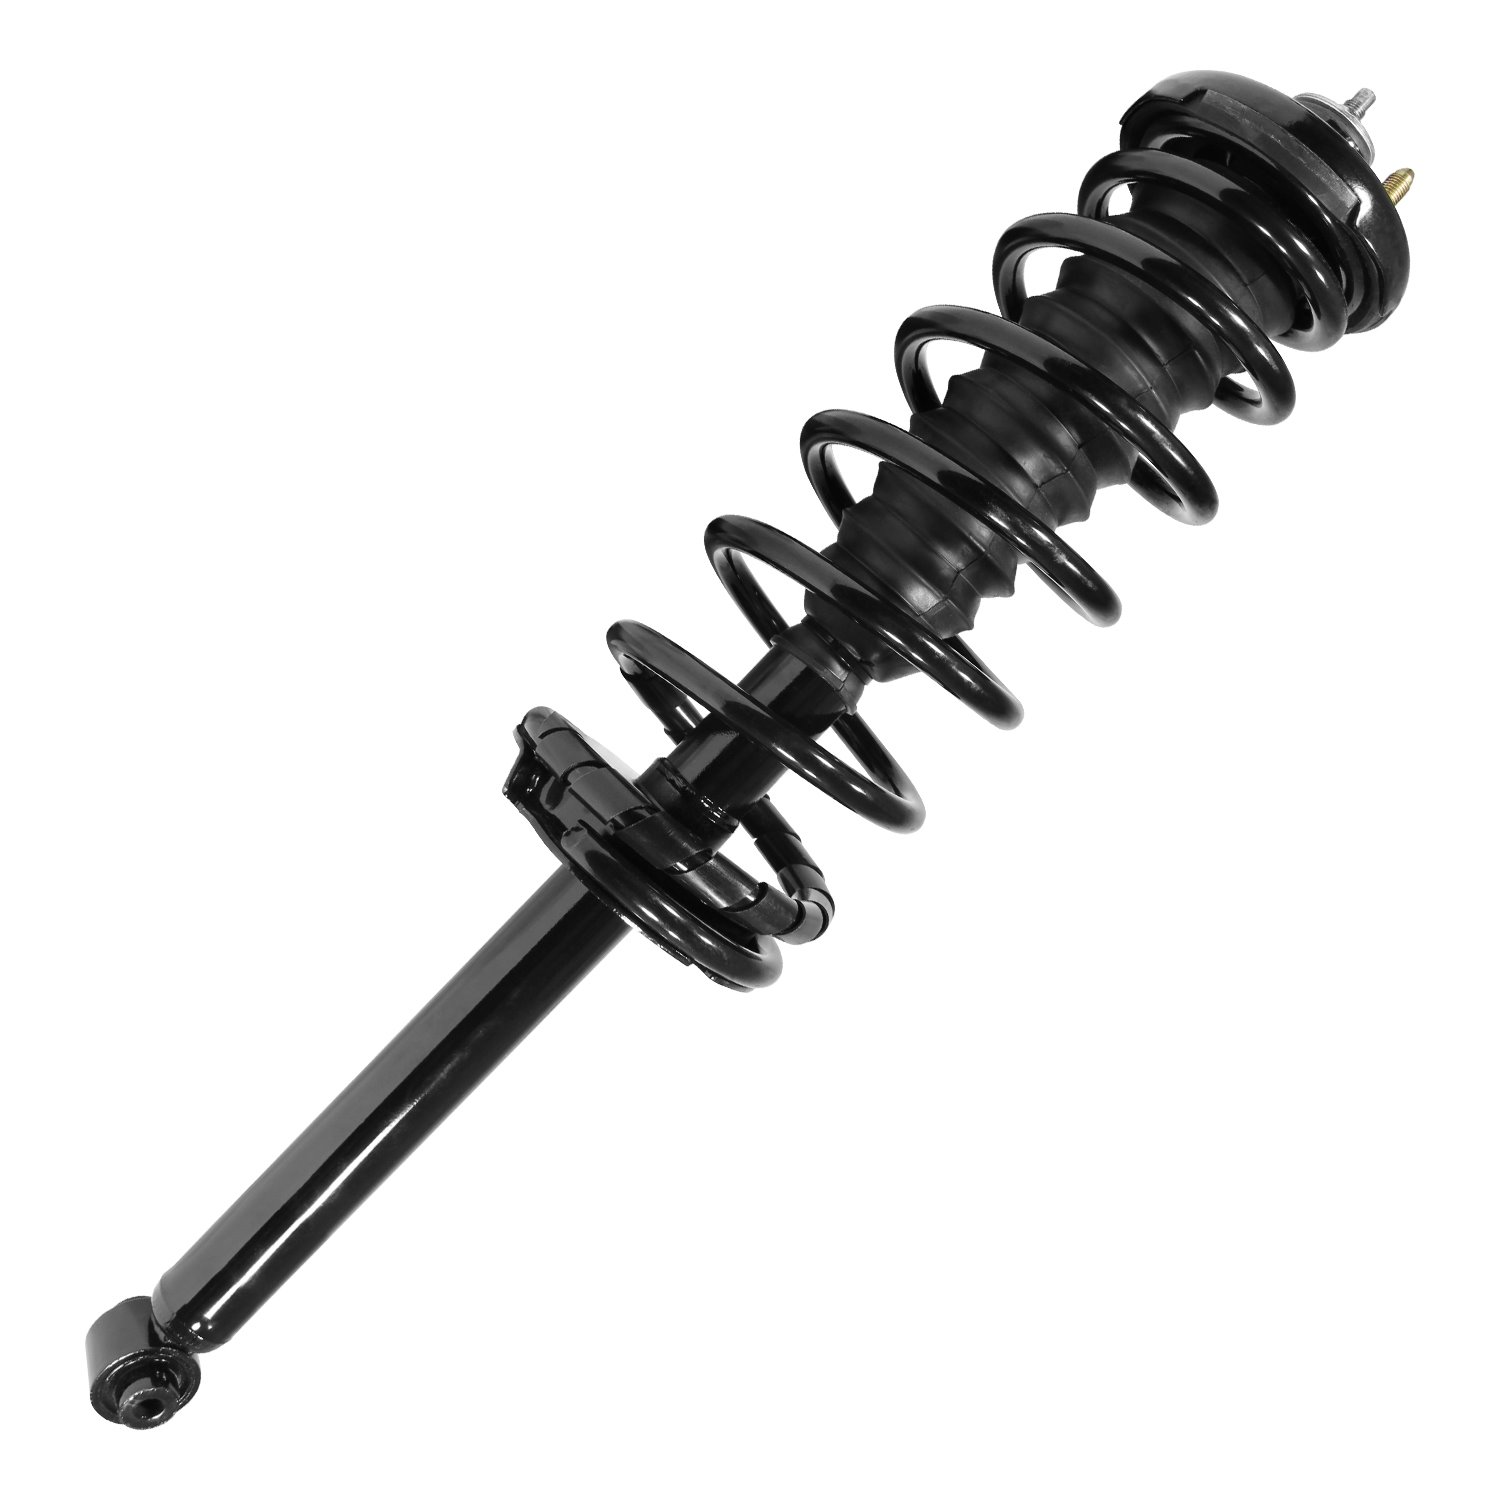 15280 Suspension Strut & Coil Spring Assembly Fits Select Acura CL, Honda Accord